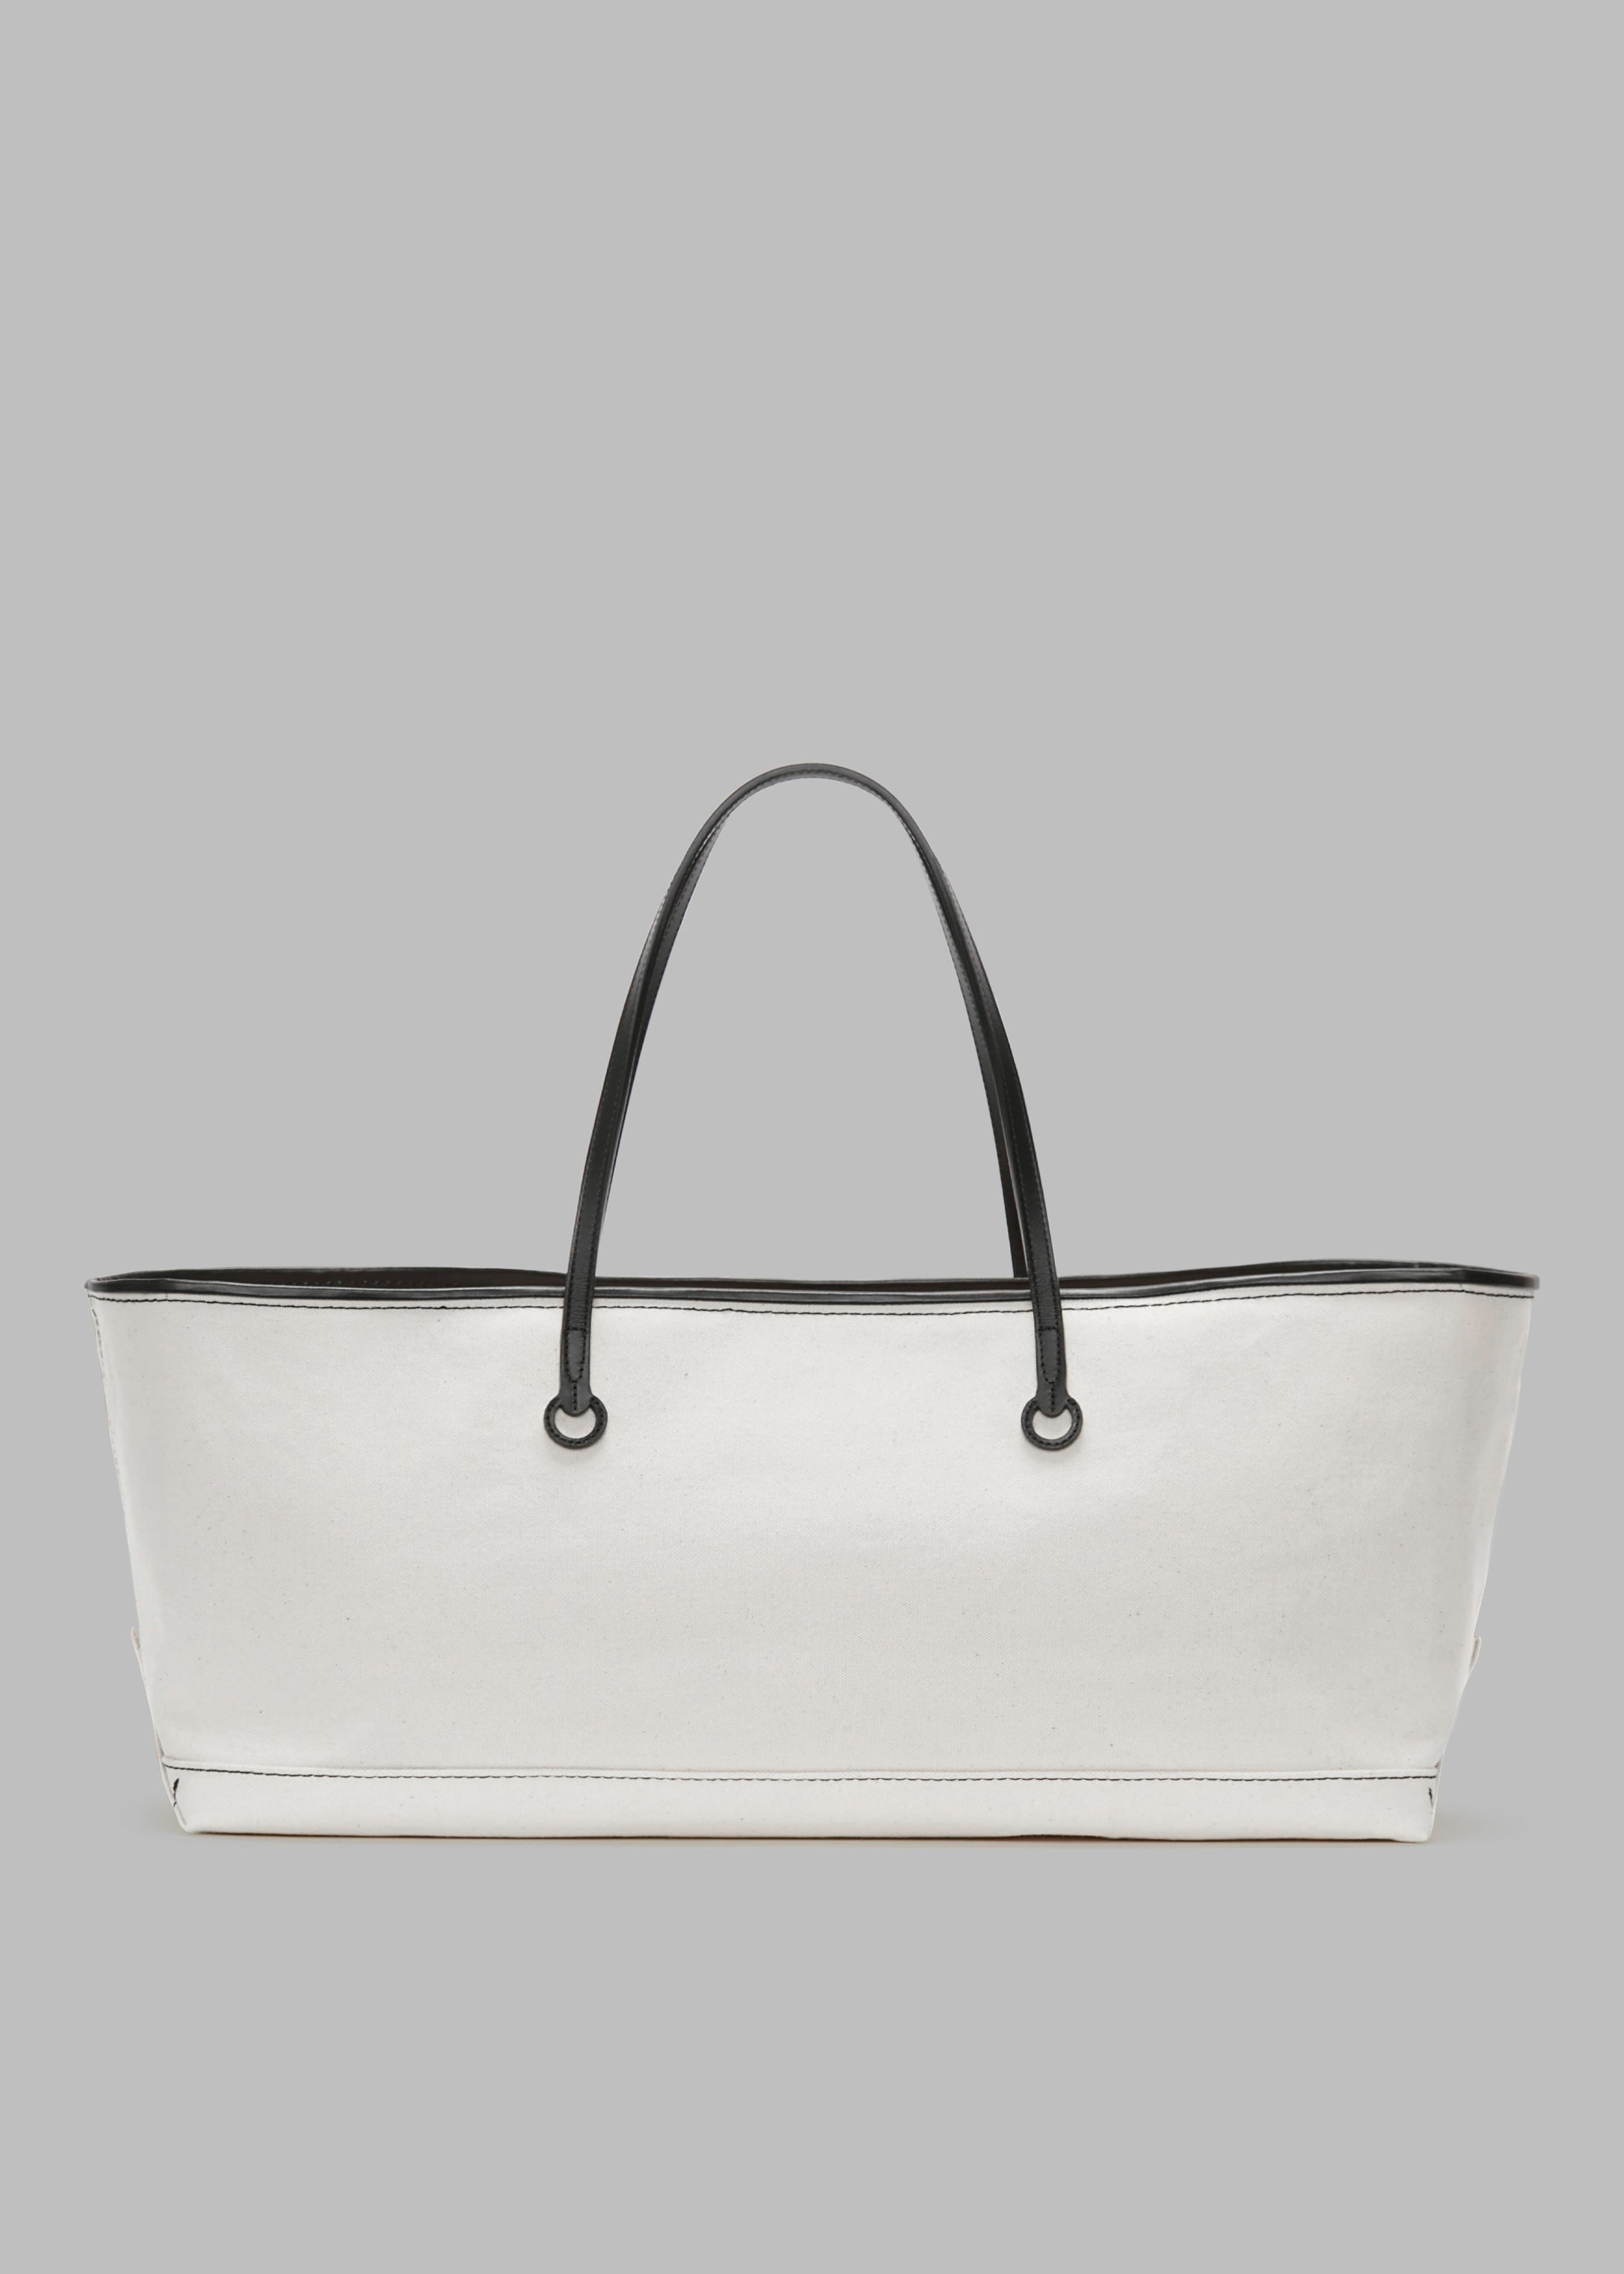 JW Anderson Anchor Stretch Tote - Natural/Black - 7